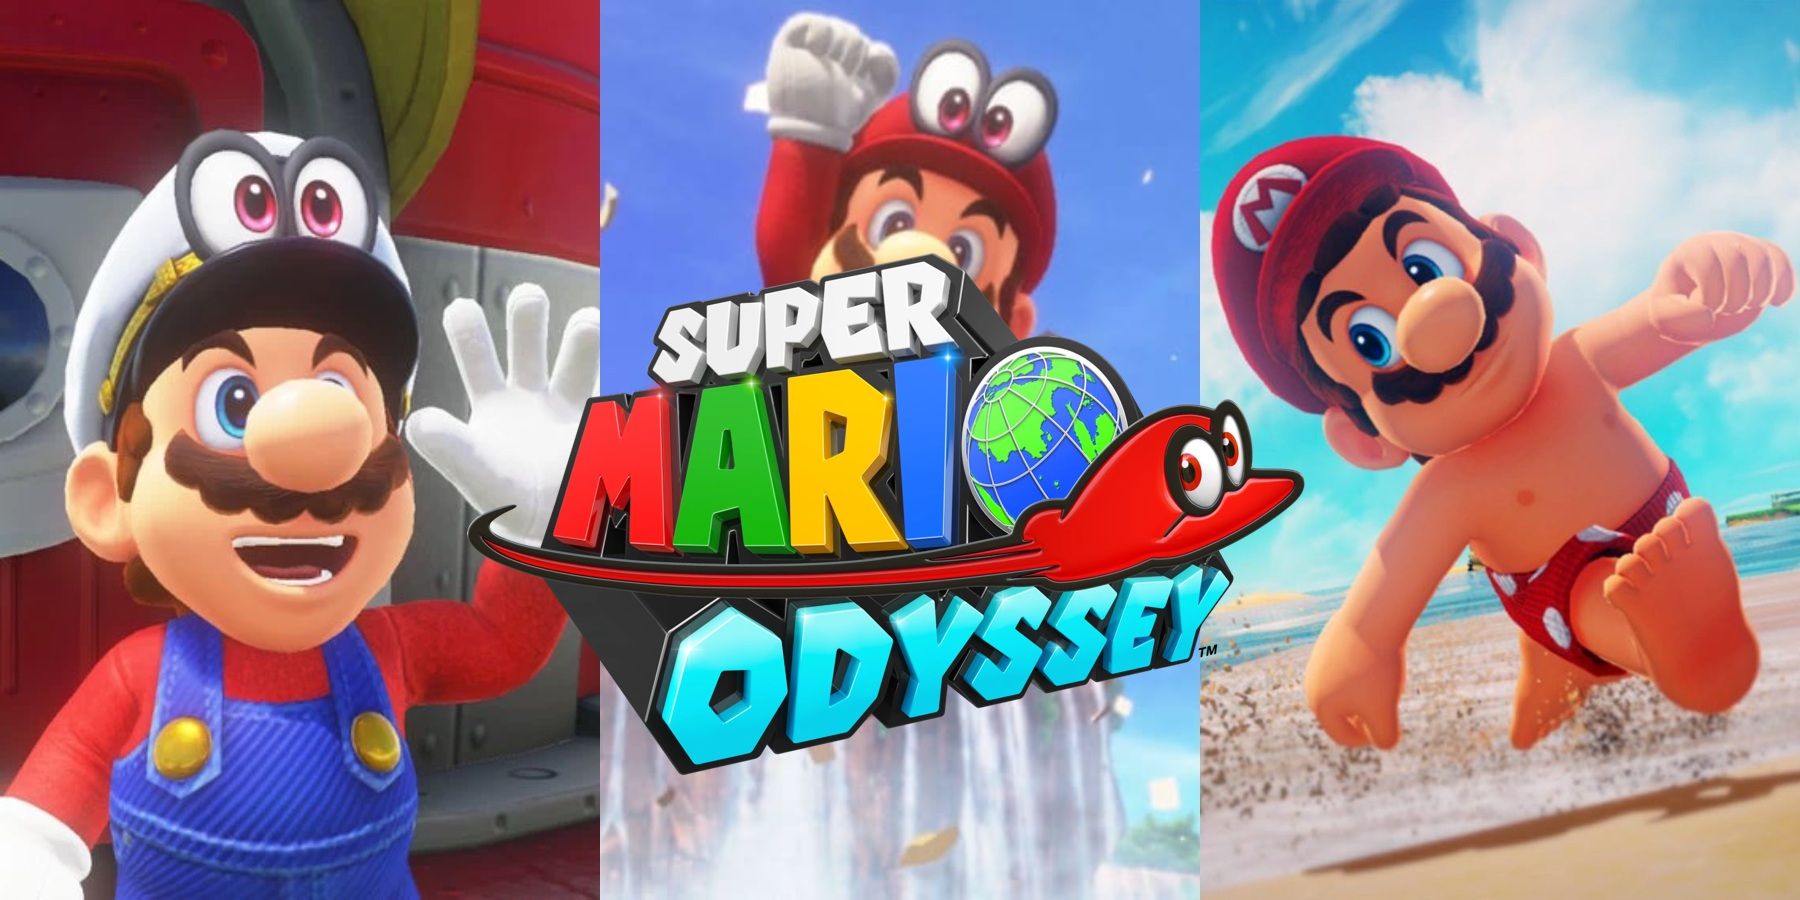 kingdom list (may be more), Super Mario Odyssey